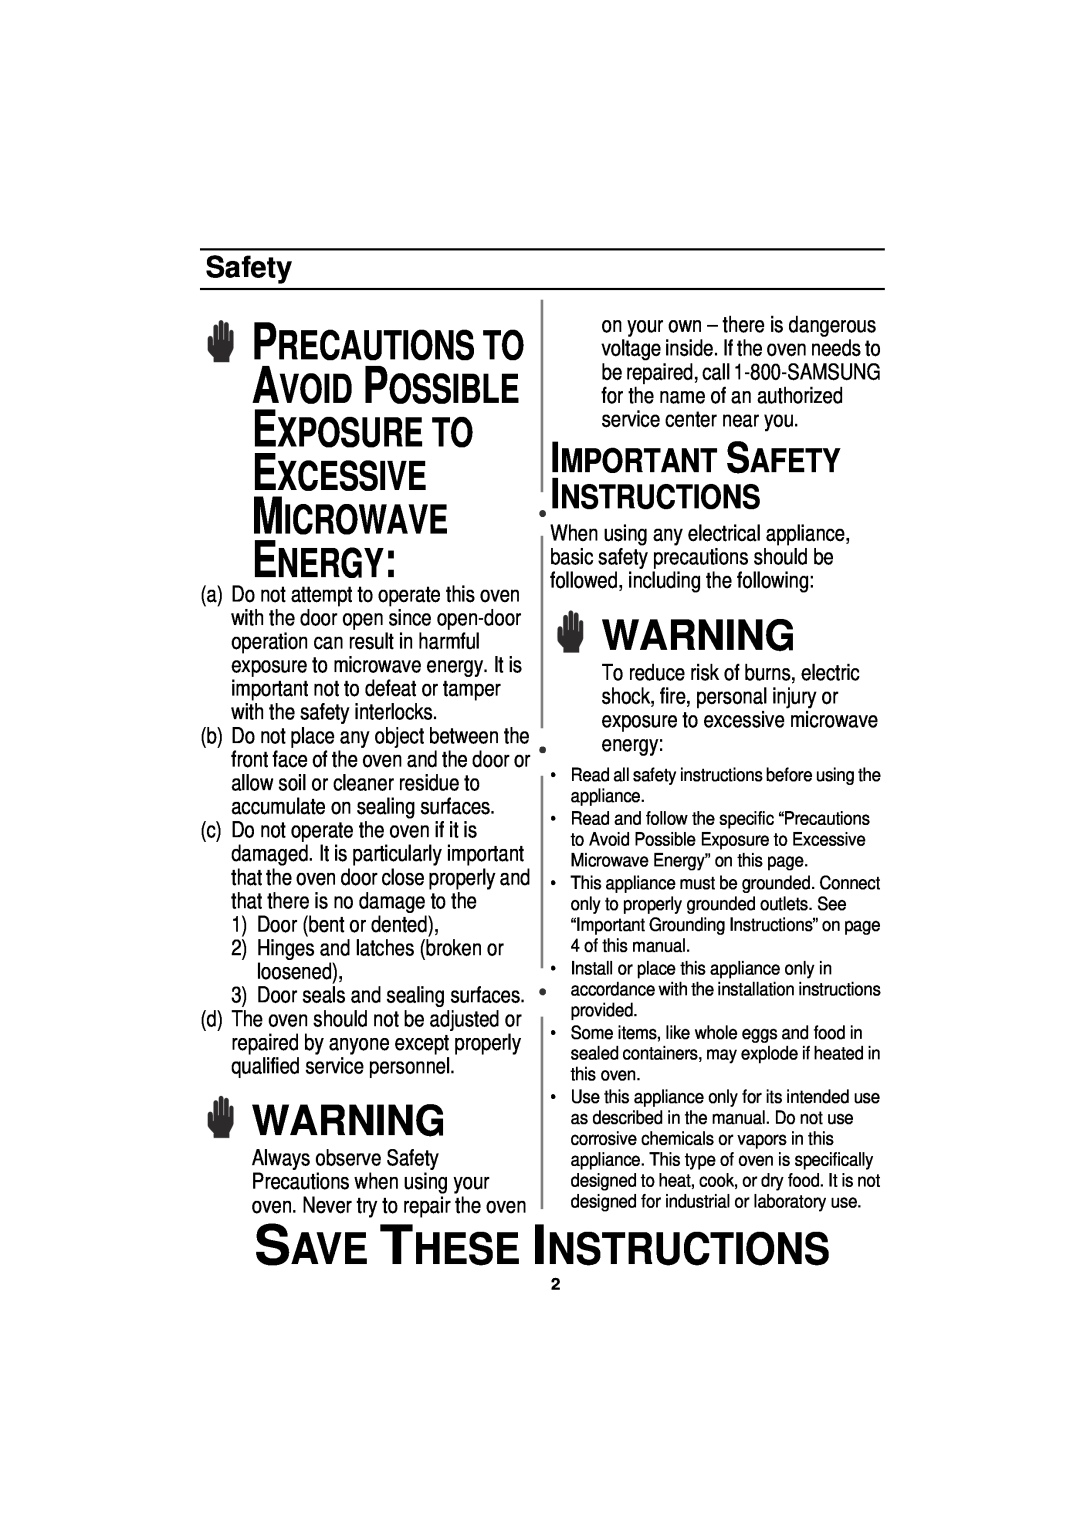 Samsung DE68-01931A-01 manual Save These Instructions, Precautions To Avoid Possible, Important Safety Instructions 